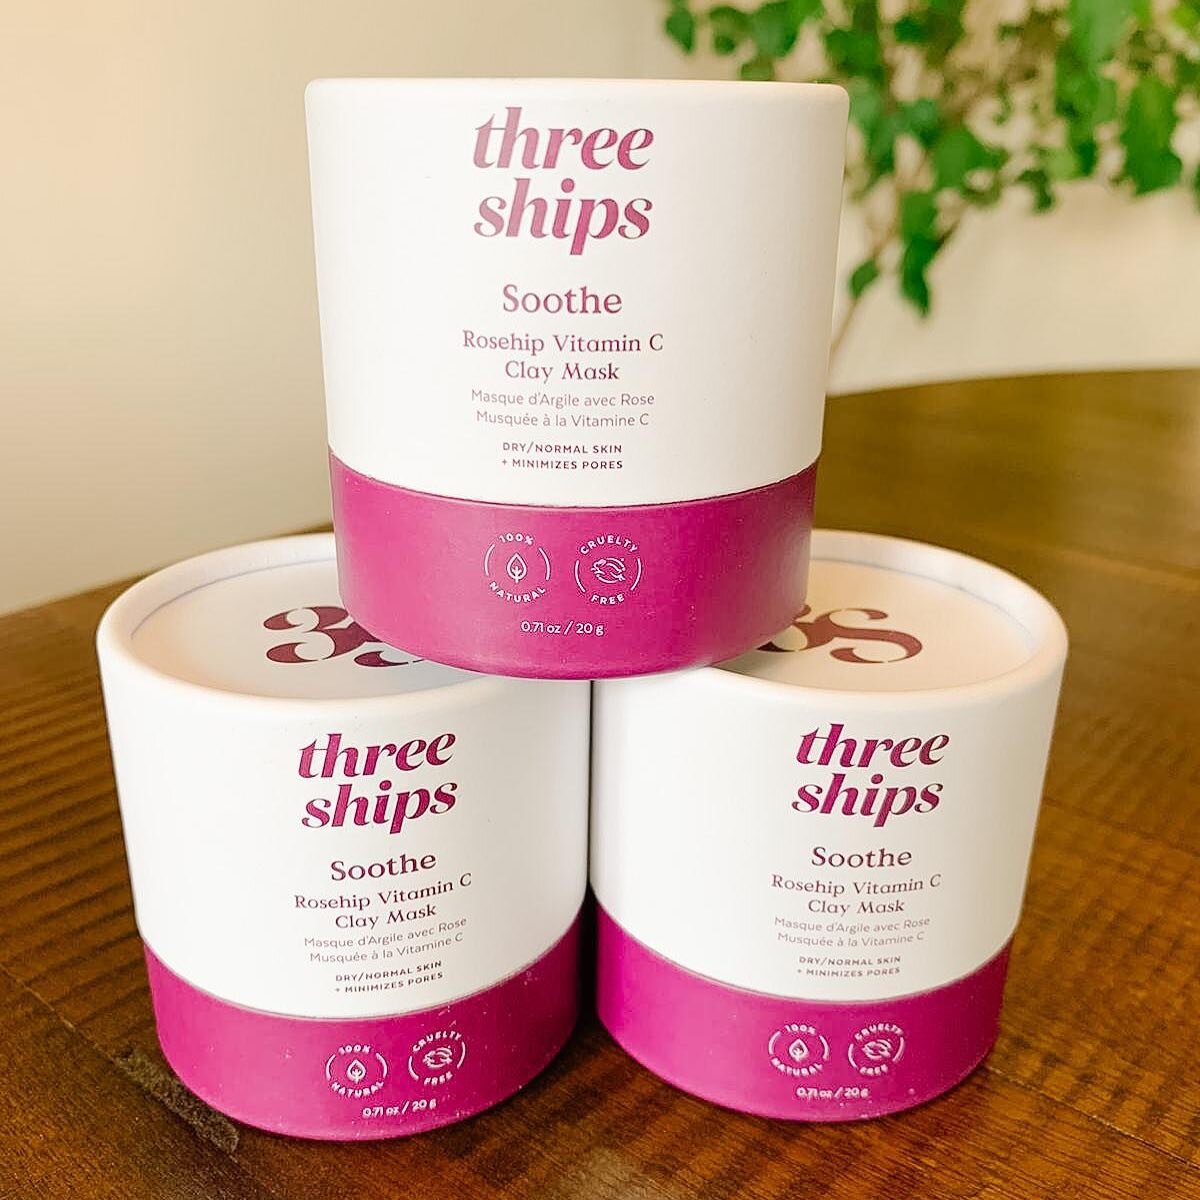 We hear you Mamas! You loved receiving Three Ships skincare products in your first Mombitious boxes. 

Happy to say that the Three Ships Soothe Rosehip Vitamin C Clay Mask will come in your Cozy-Mama box :) 

Ps-did you know that their line of produc